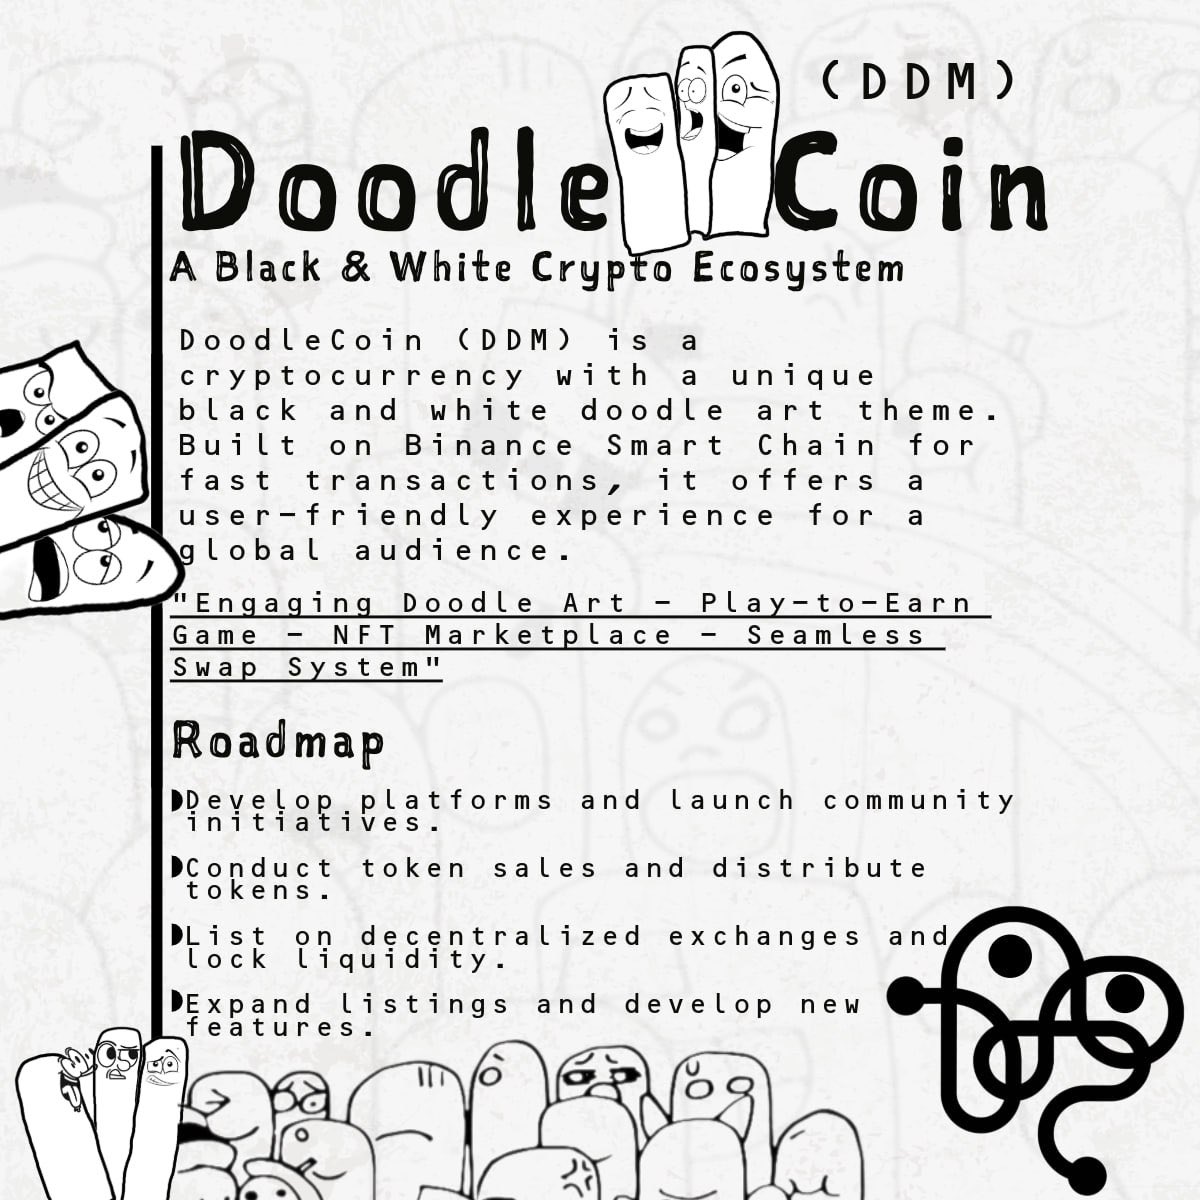 ⏳Doodle art meets crypto!⏳
🌟DoodleCoin ( $DDM )is a black & white coin.
🎯Join the Doodleverse! 
✍️ doodledimes.io

#DoodleCoin #DDm #DDmCoin #DoodleDimes #BlackAndWhite #BSC #Crypto #Memecoin #P2E #NFT #Gaming #Art #DigitalArt #NewFeature #DoodleTheme #Web3…